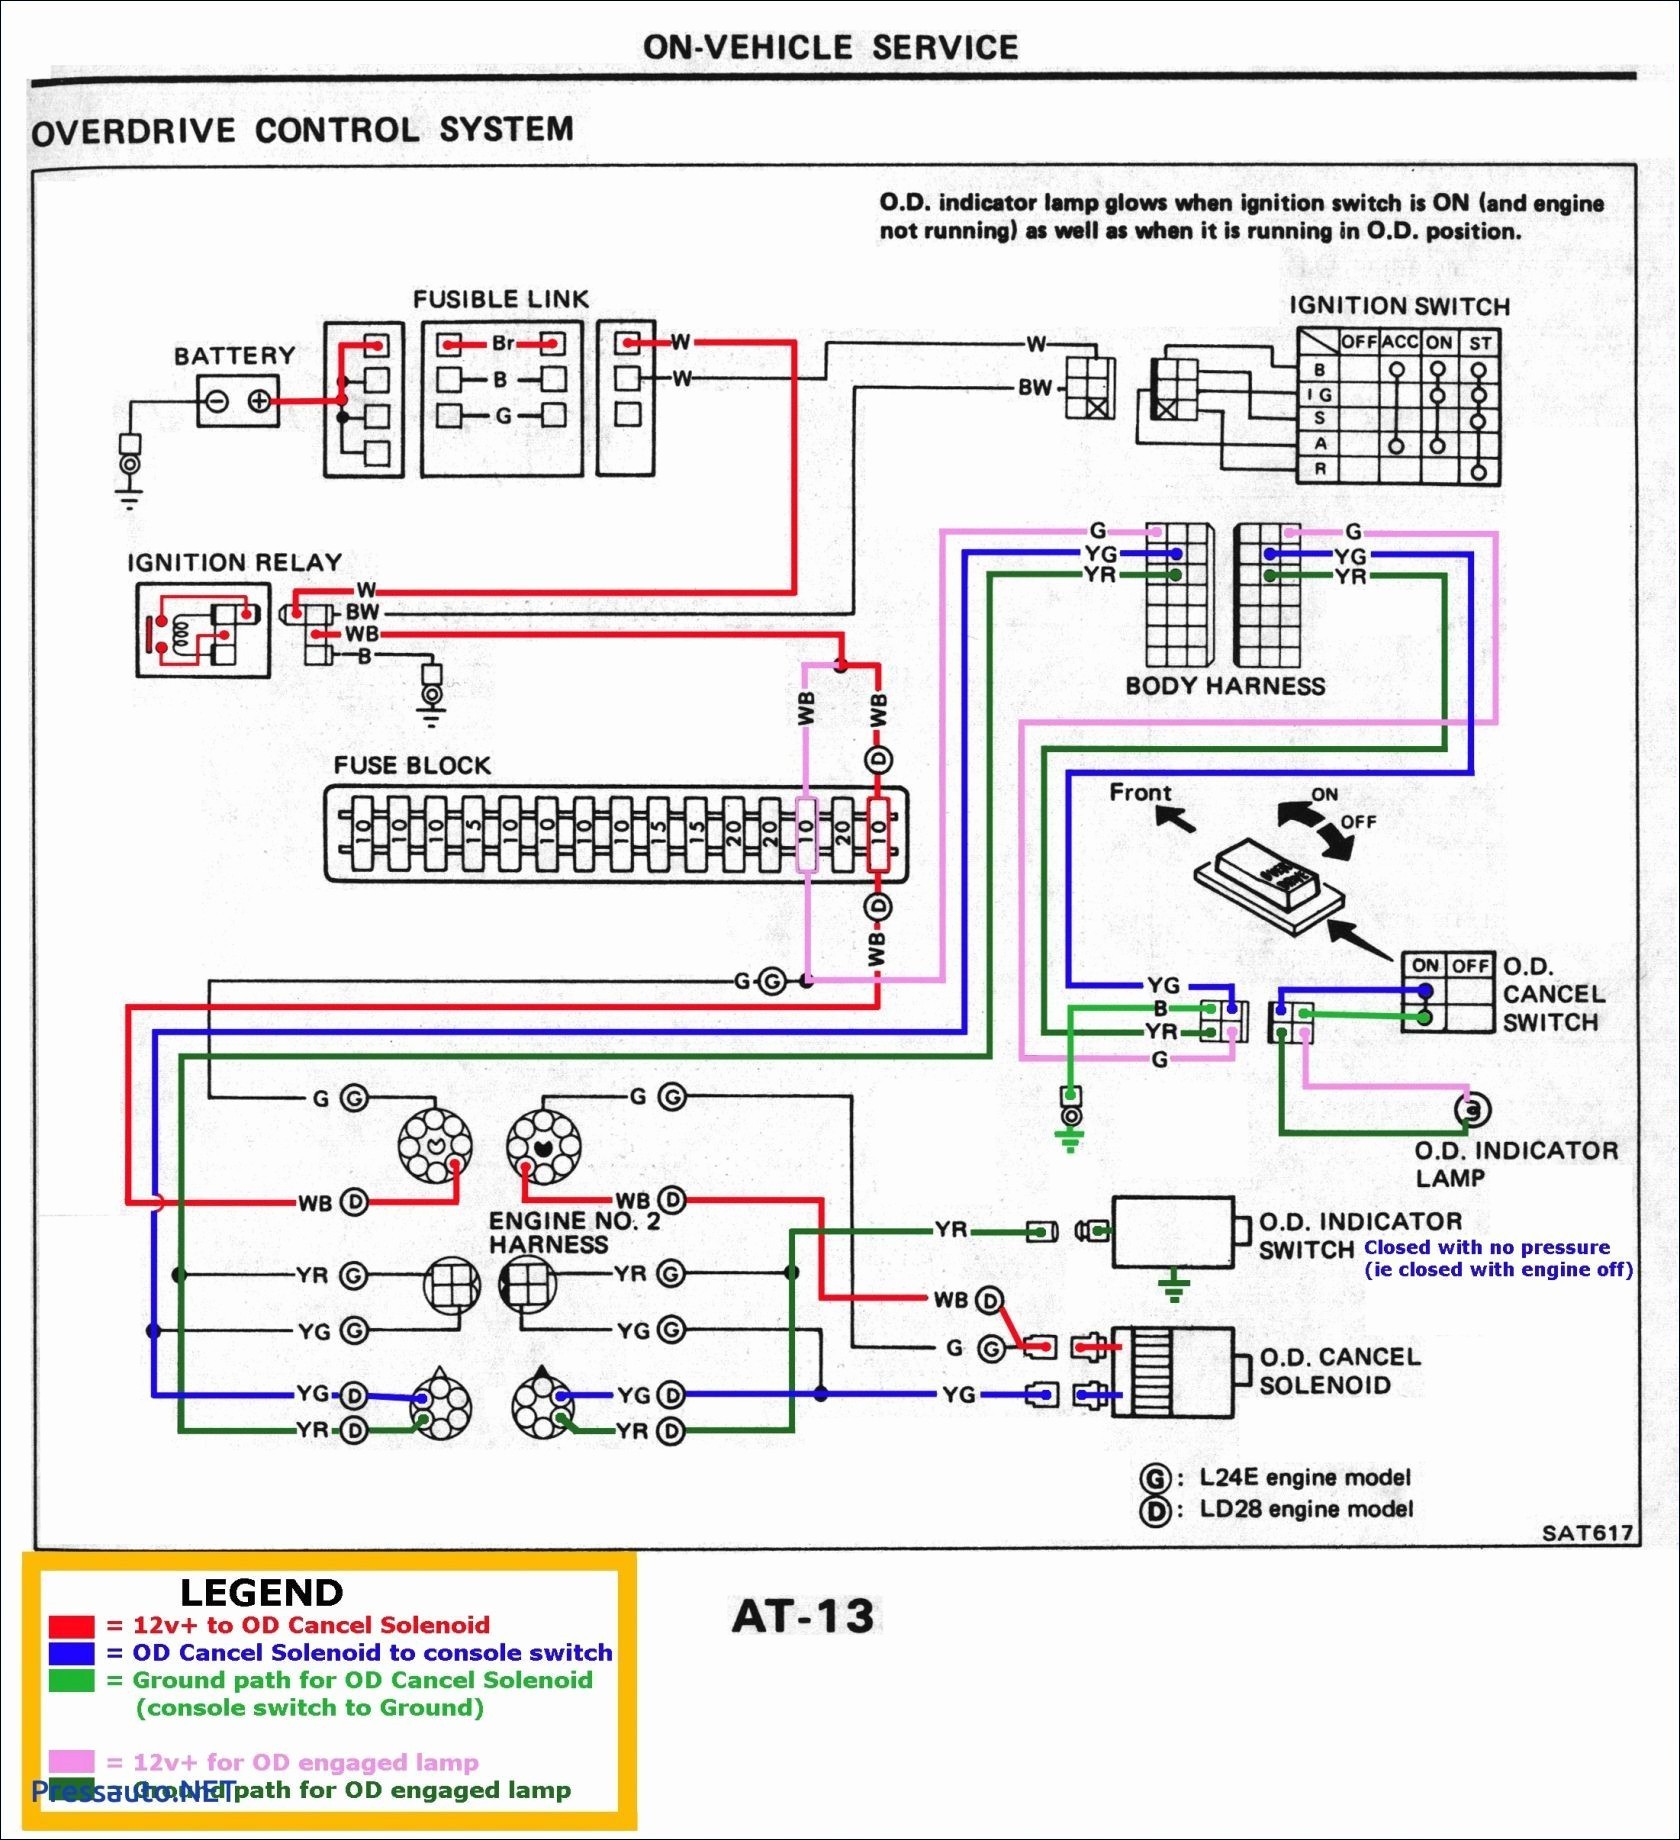 Wiring Diagram A Light Switch New Wiring Diagram For A Dimmer Light Switch Save 50 Lovely Ceiling Fan